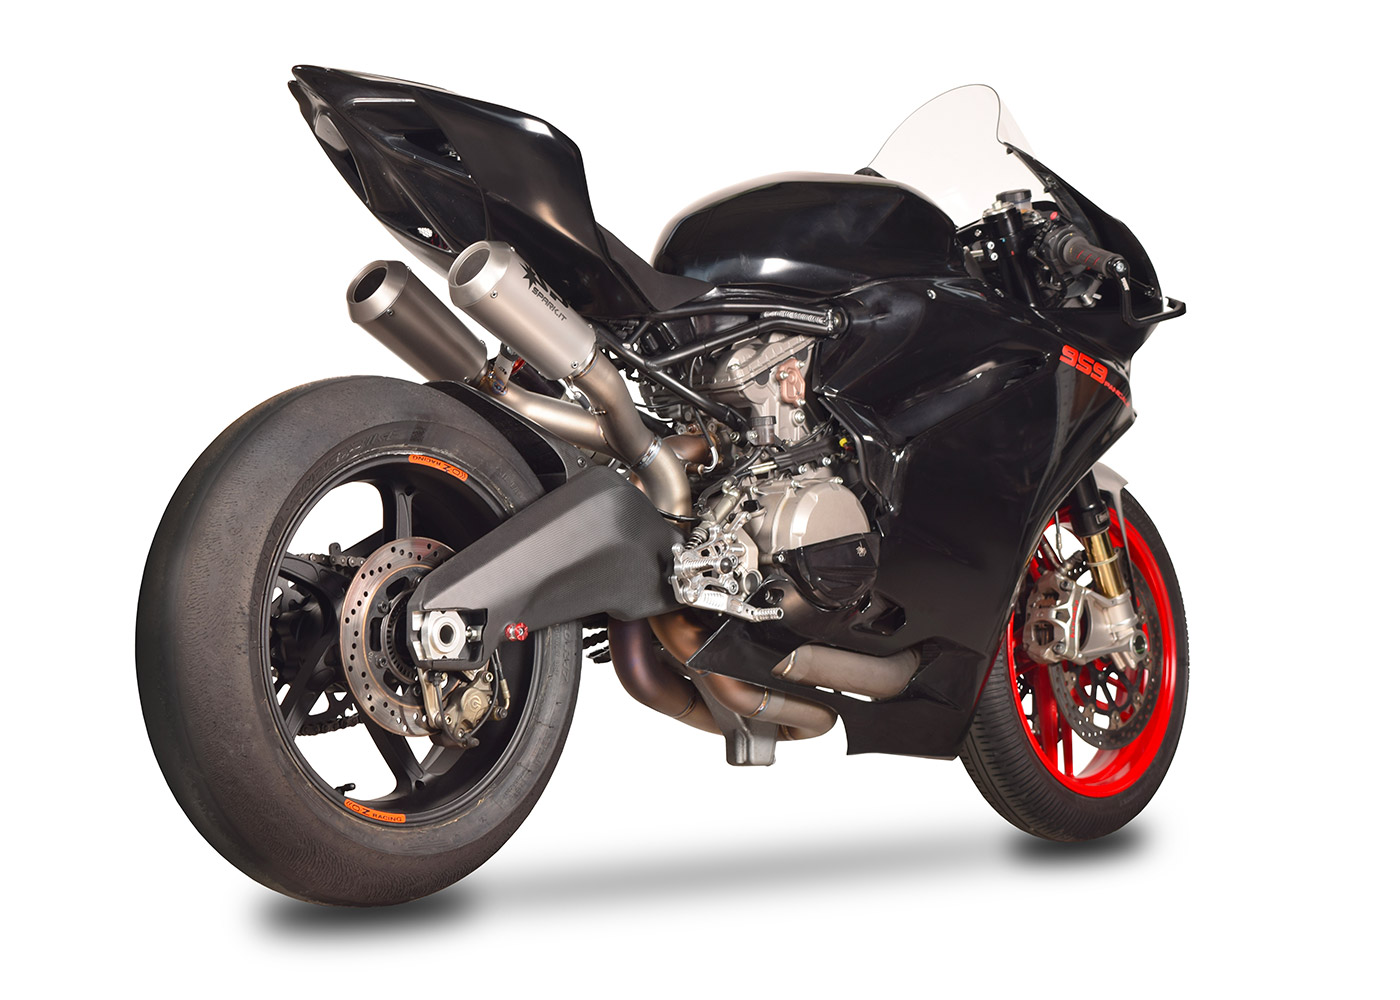 Exhaust system GDU8833 for Ducati PANIGALE V2 bike | SPARK Exhaust